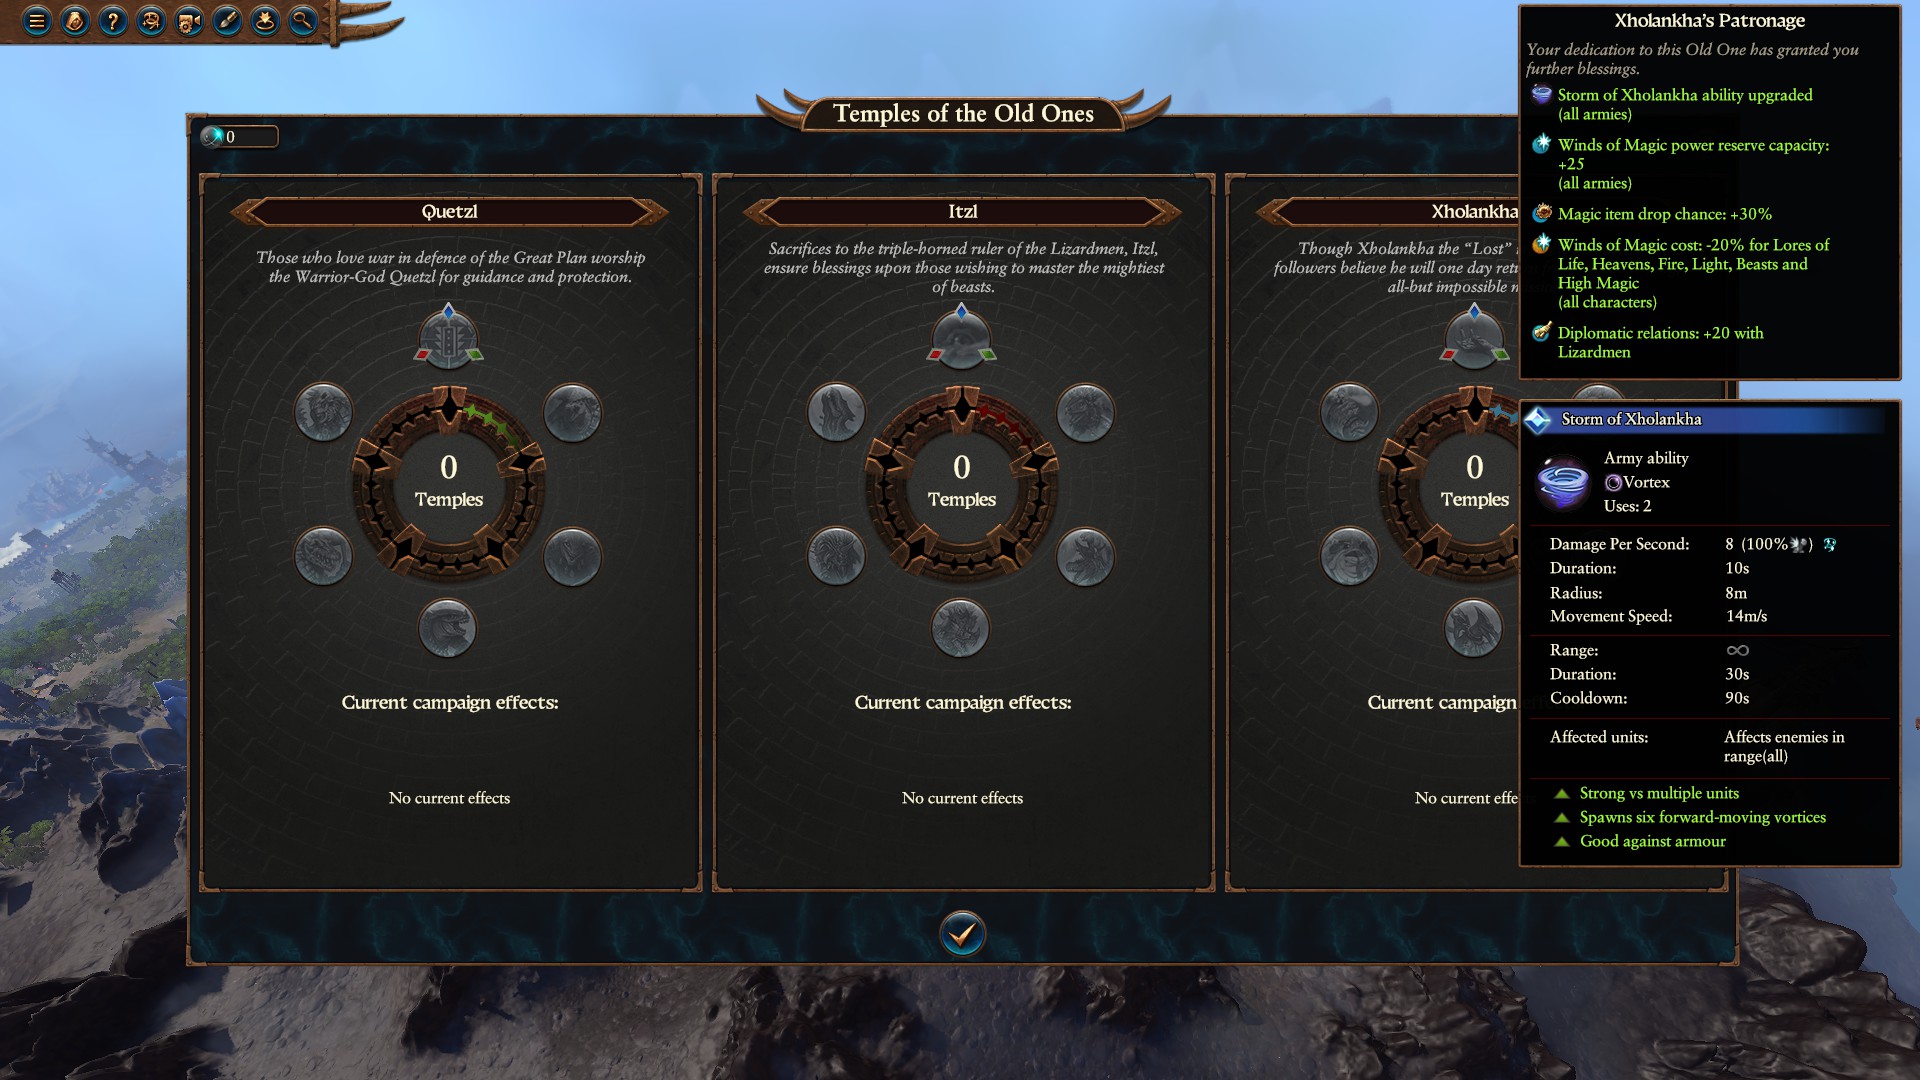 Total War: Warhammer 3 Immortal Empires Nakai the Wanderer - Lizardmen campaign overview, guide and second thoughts image 4